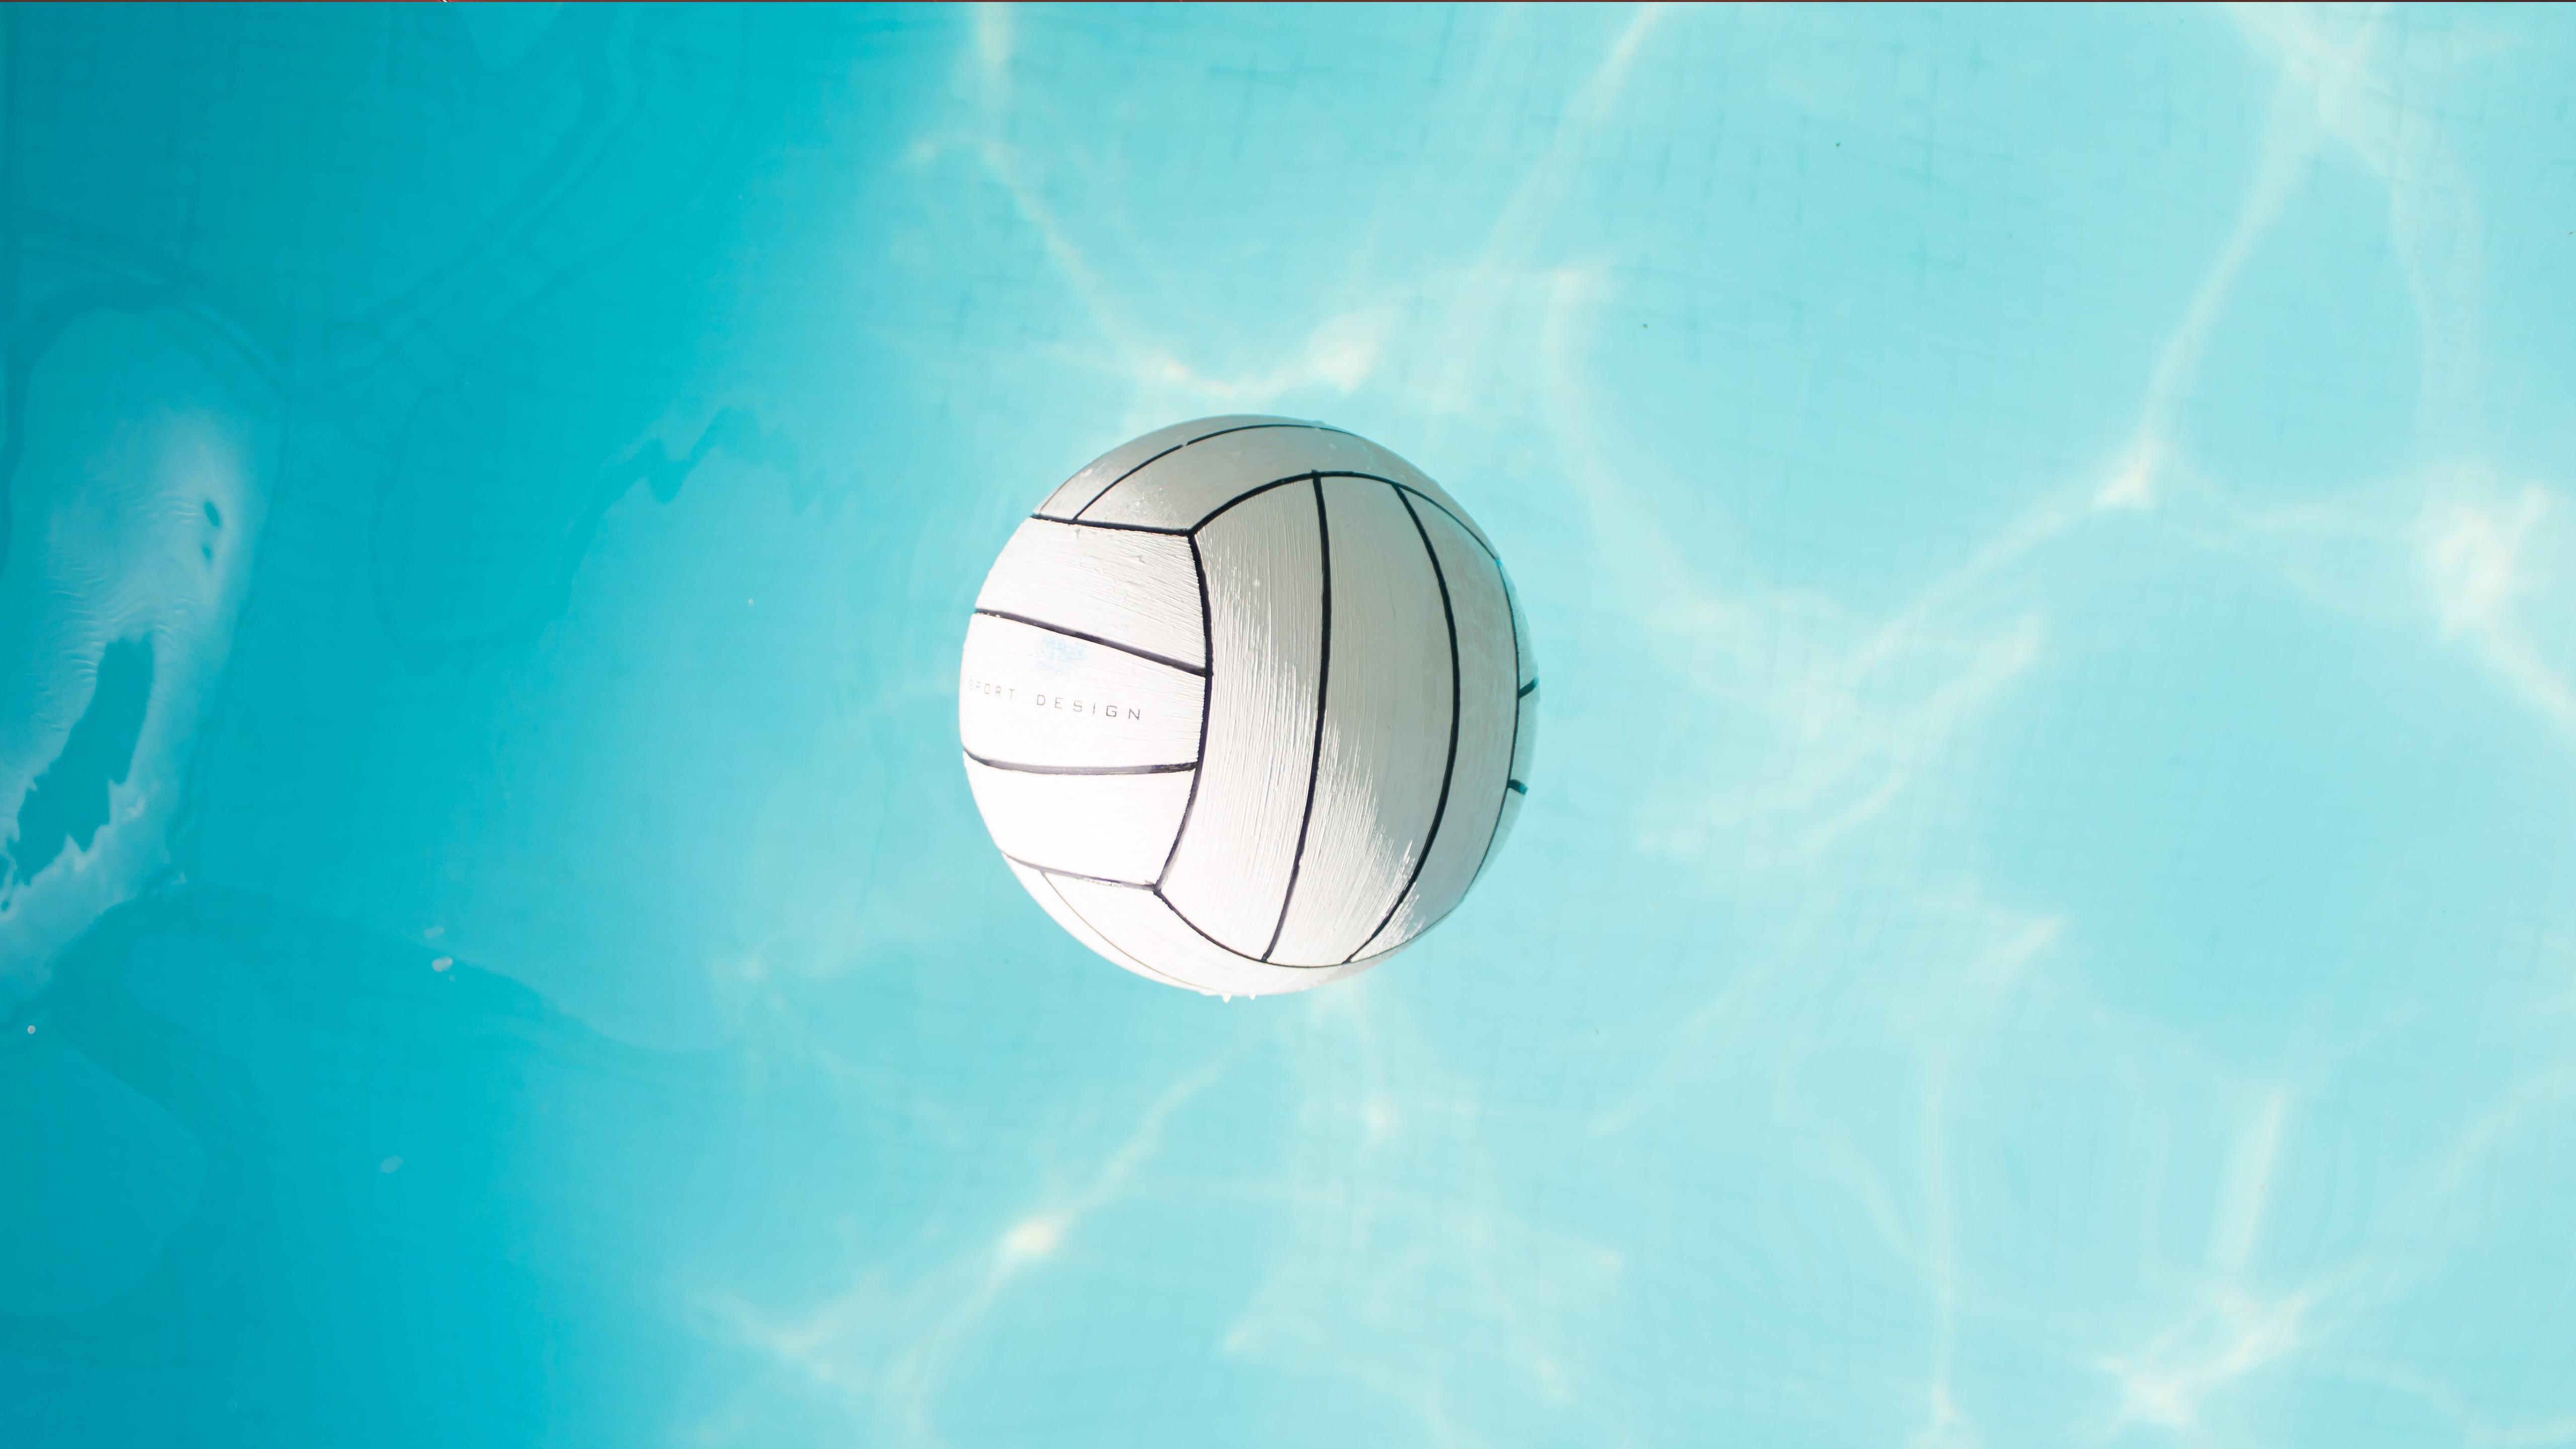 Volleyball Aesthetic Wallpapers - Top Free Volleyball Aesthetic